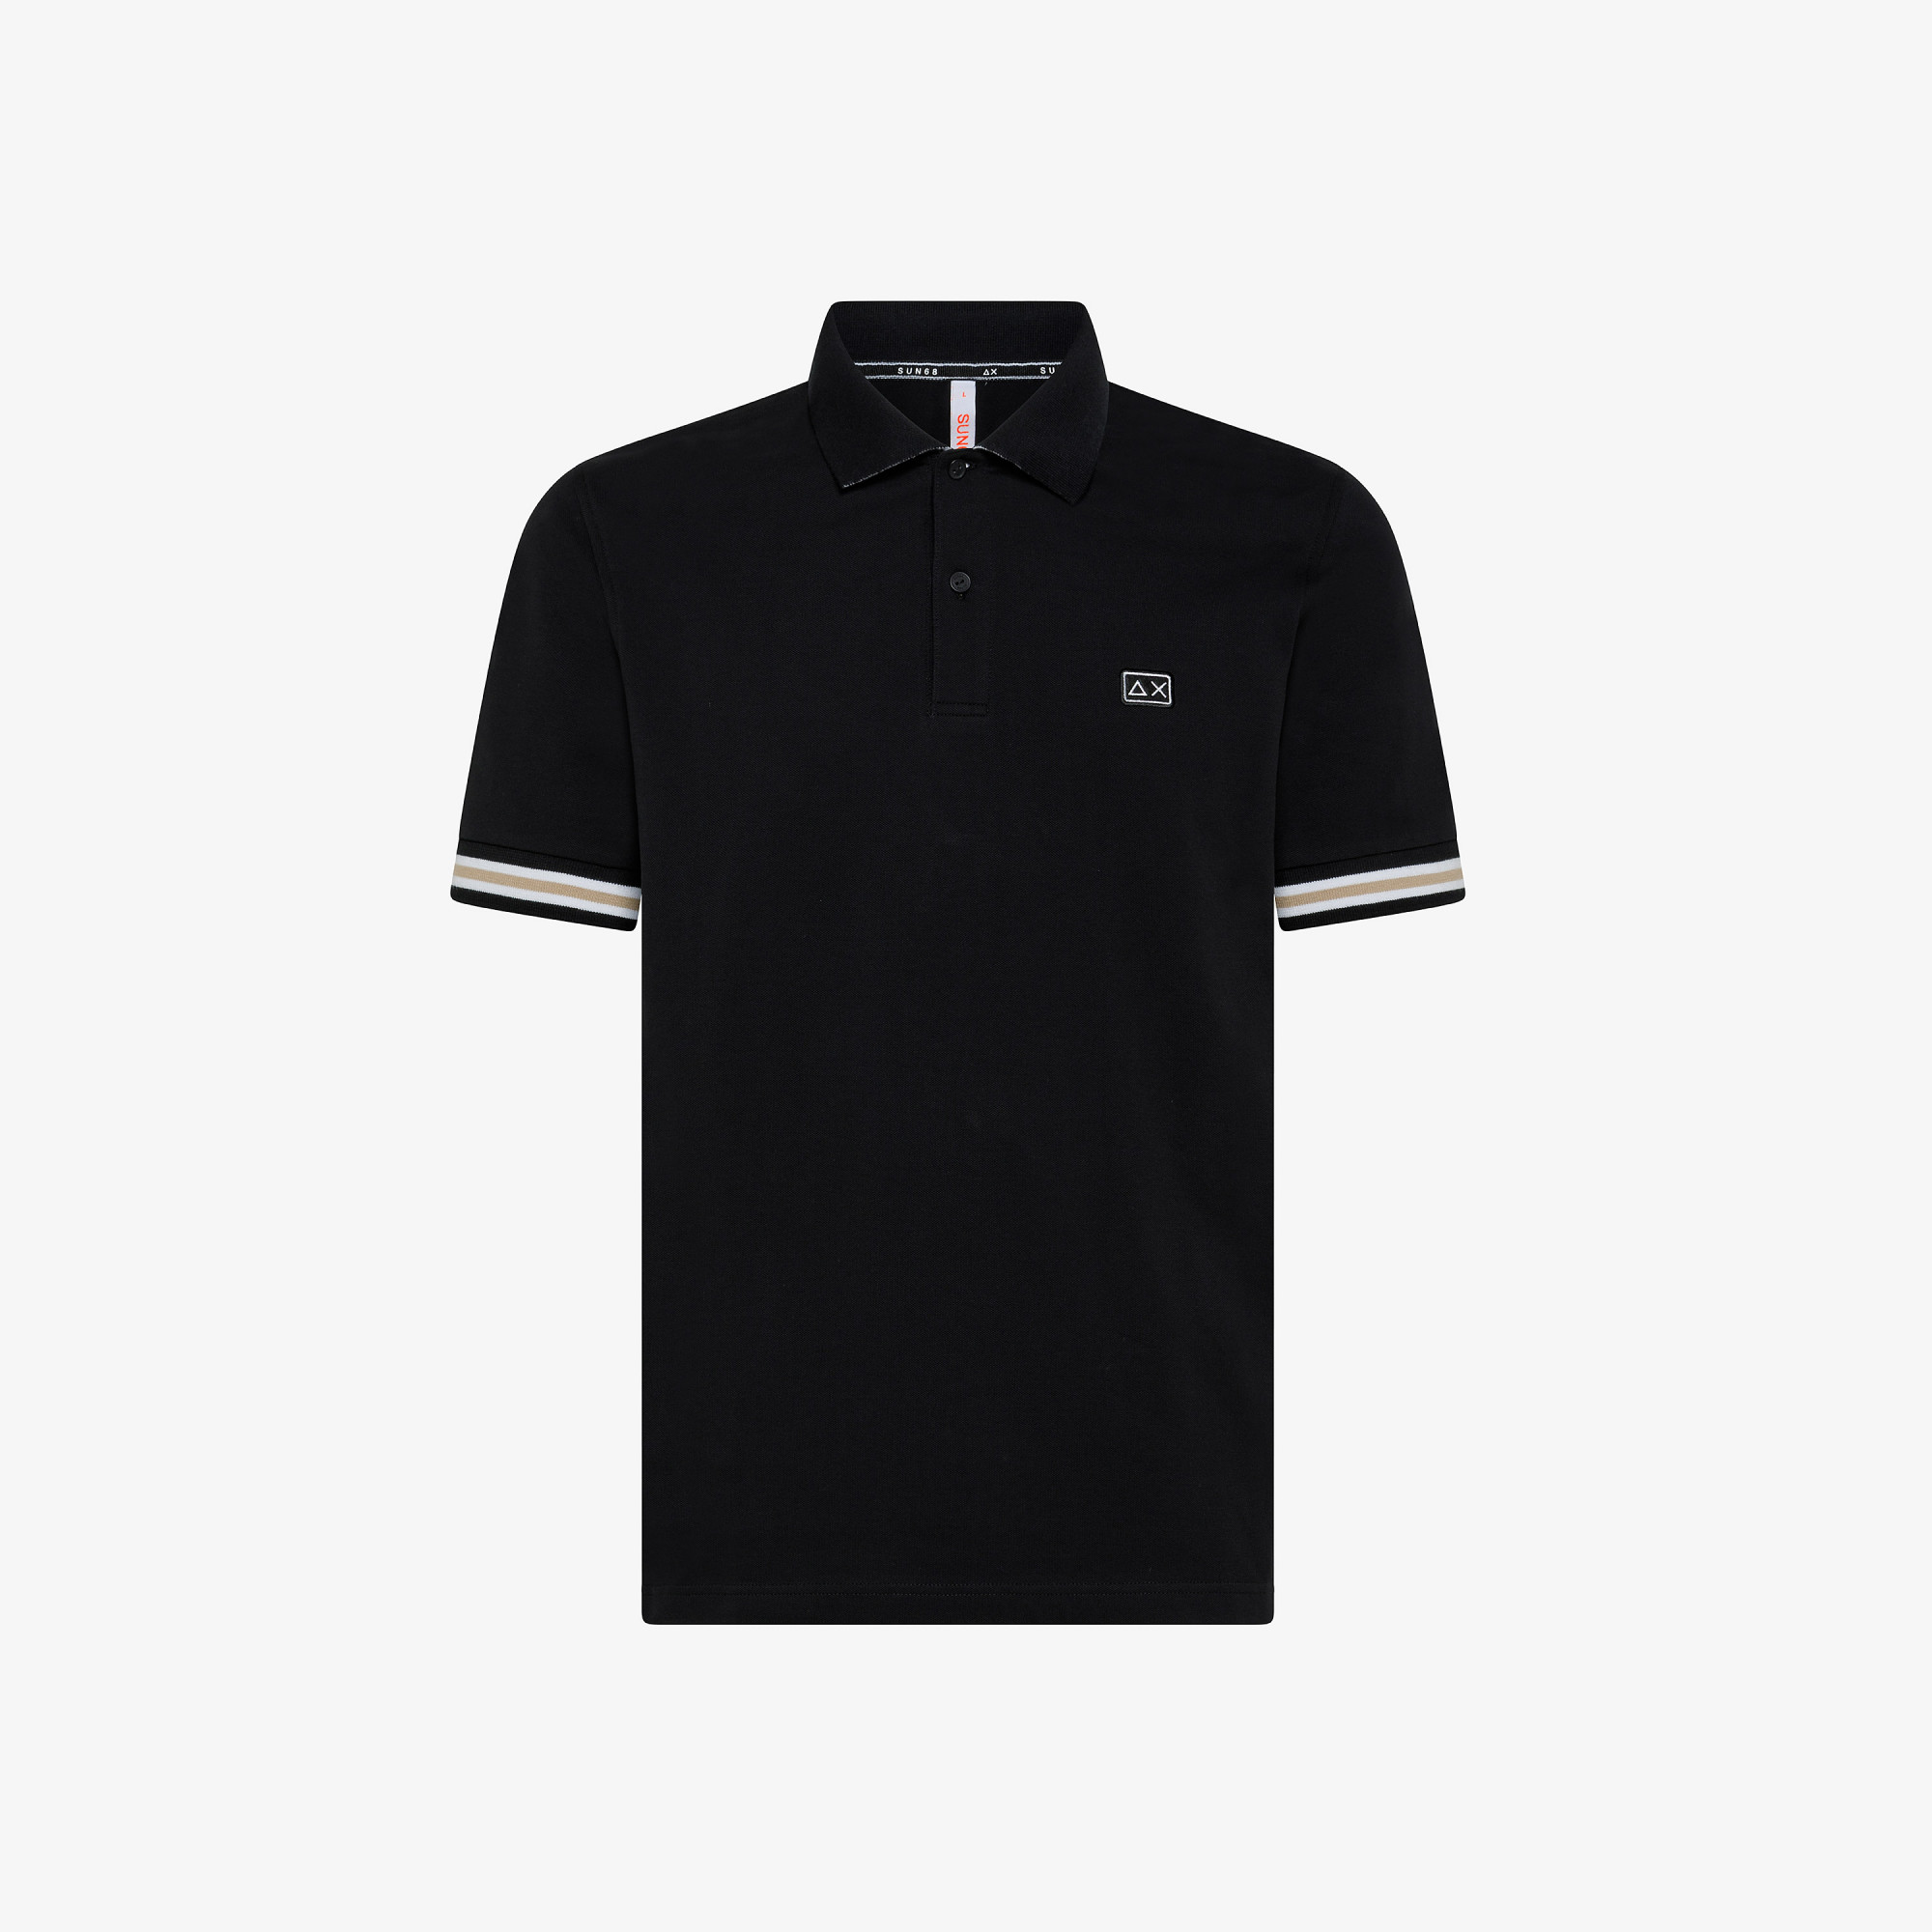 POLO STRIPES ON FRONT PLACKET AND CUFFS EL. NERO